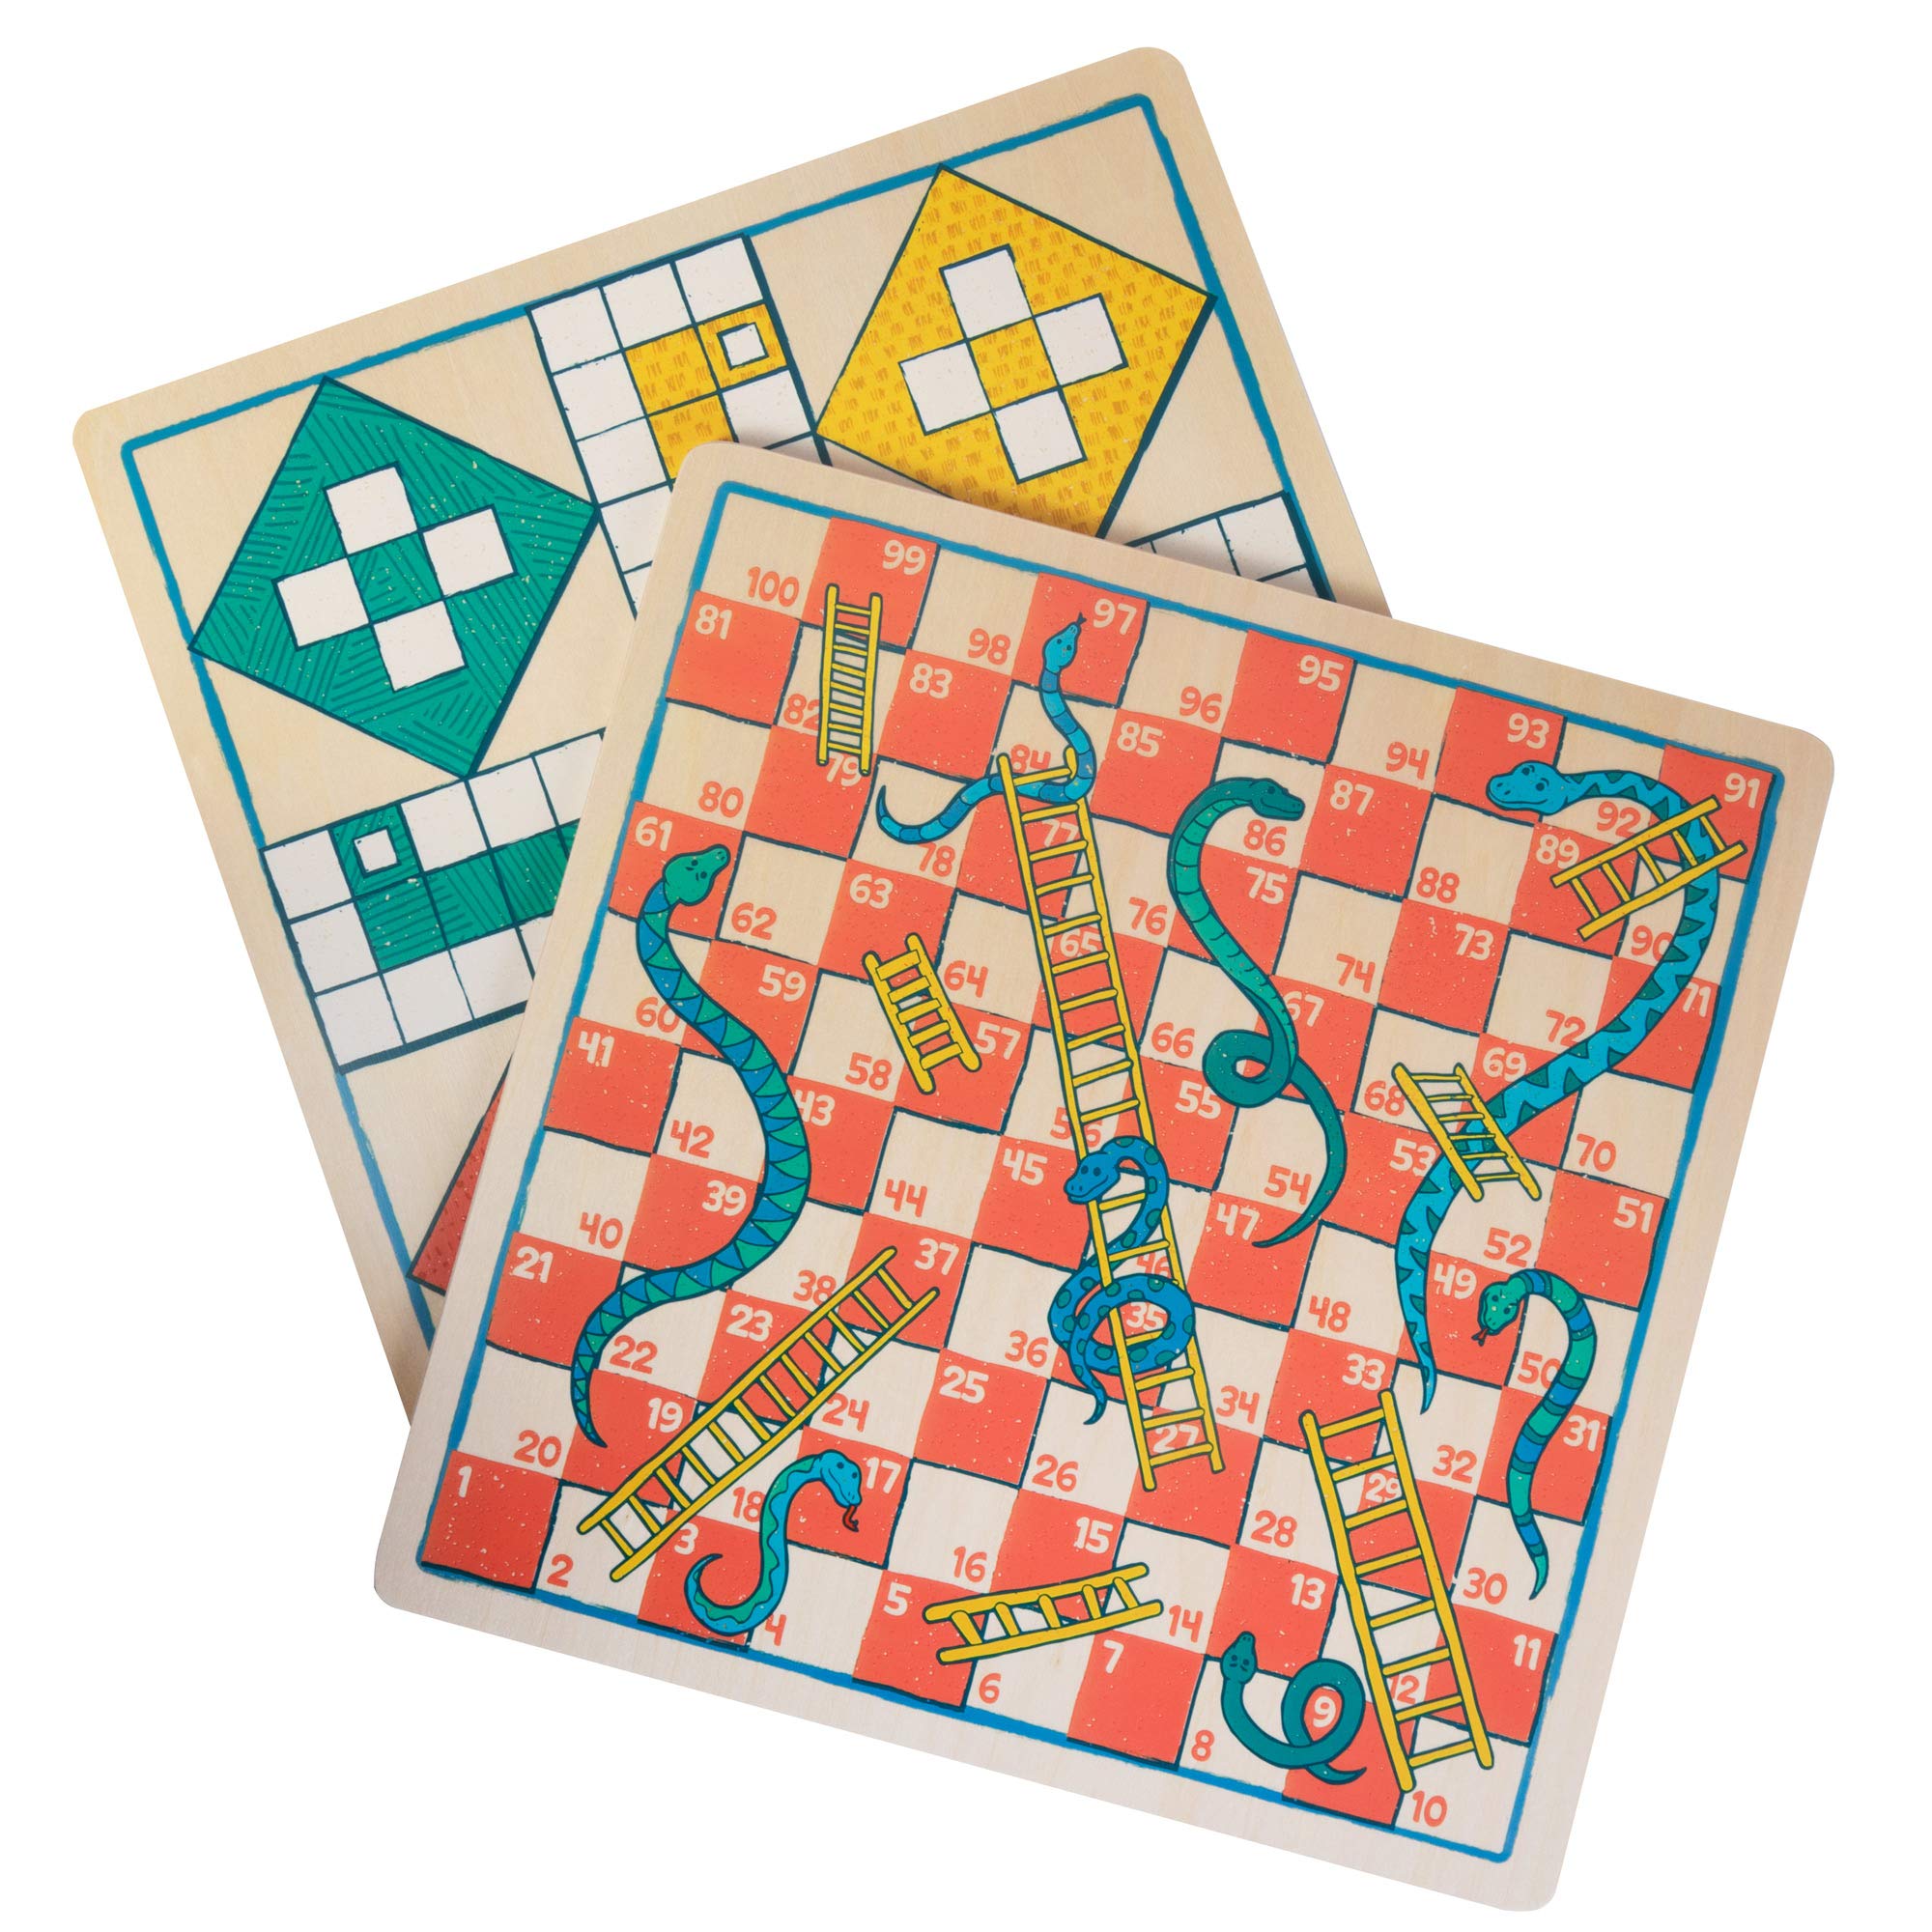 2 Games in 1 Wooden Combo Table Game Set - Includes Ludo and Snakes & Ladders!